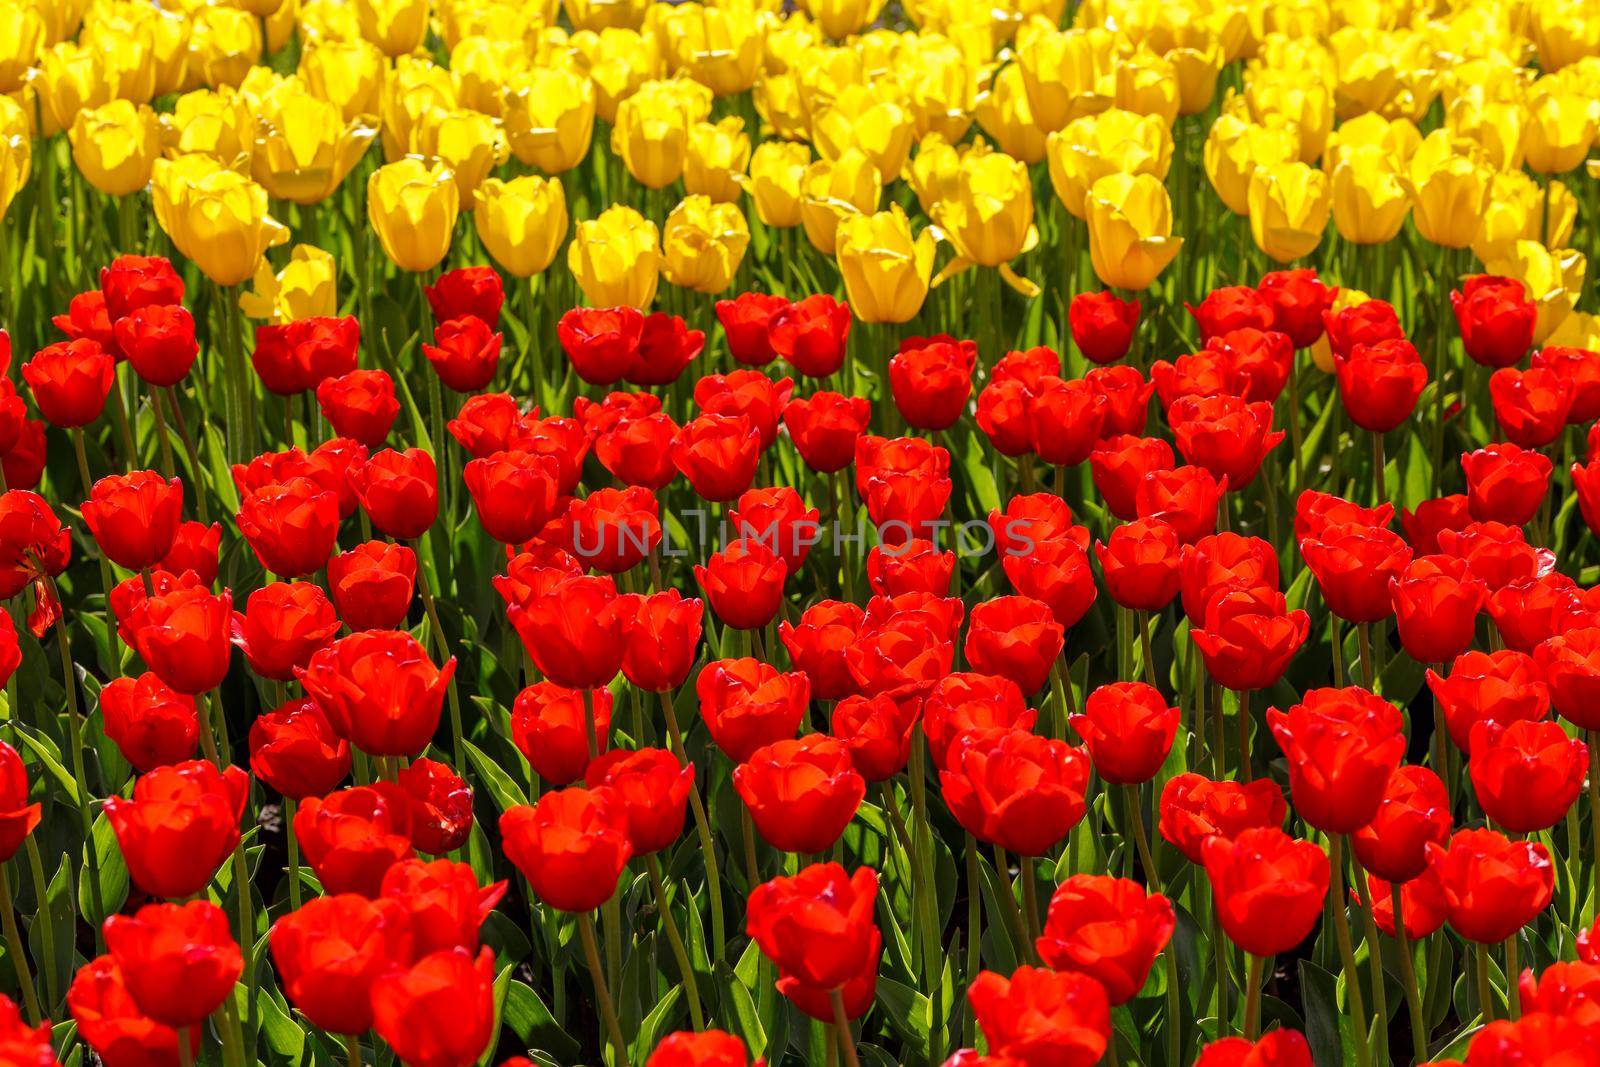 flaccid red and yellow tulips in the field at daylight splitted horiaontally - close-up full frame background with selective focus